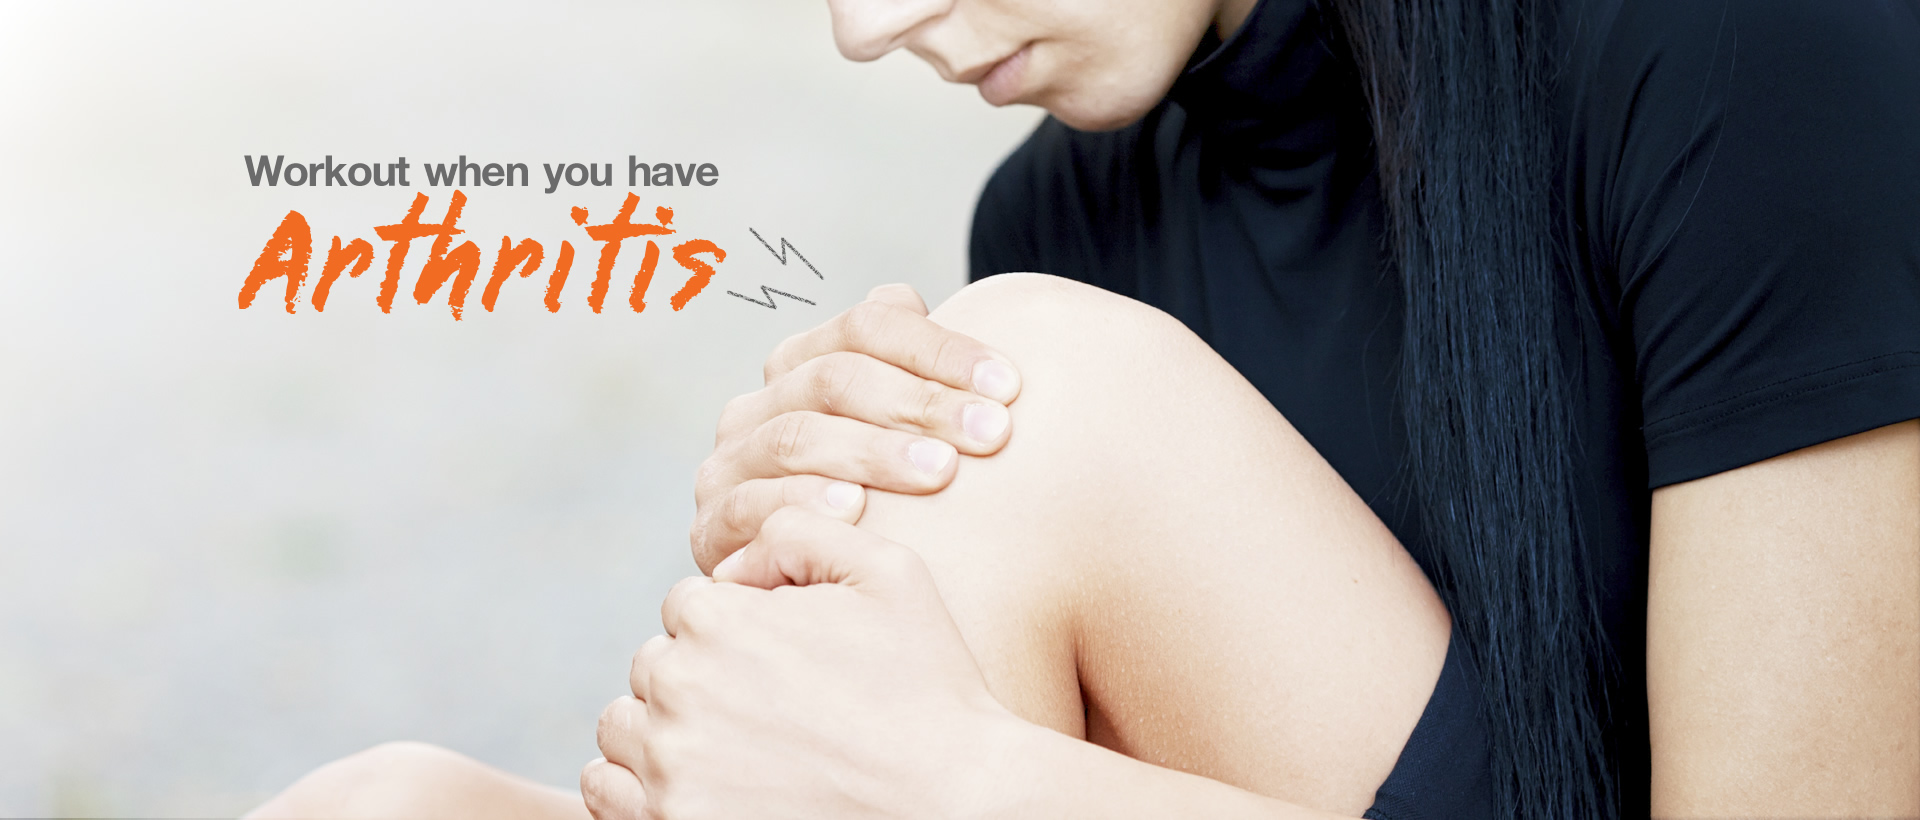 Why exercise is important if you have arthritis